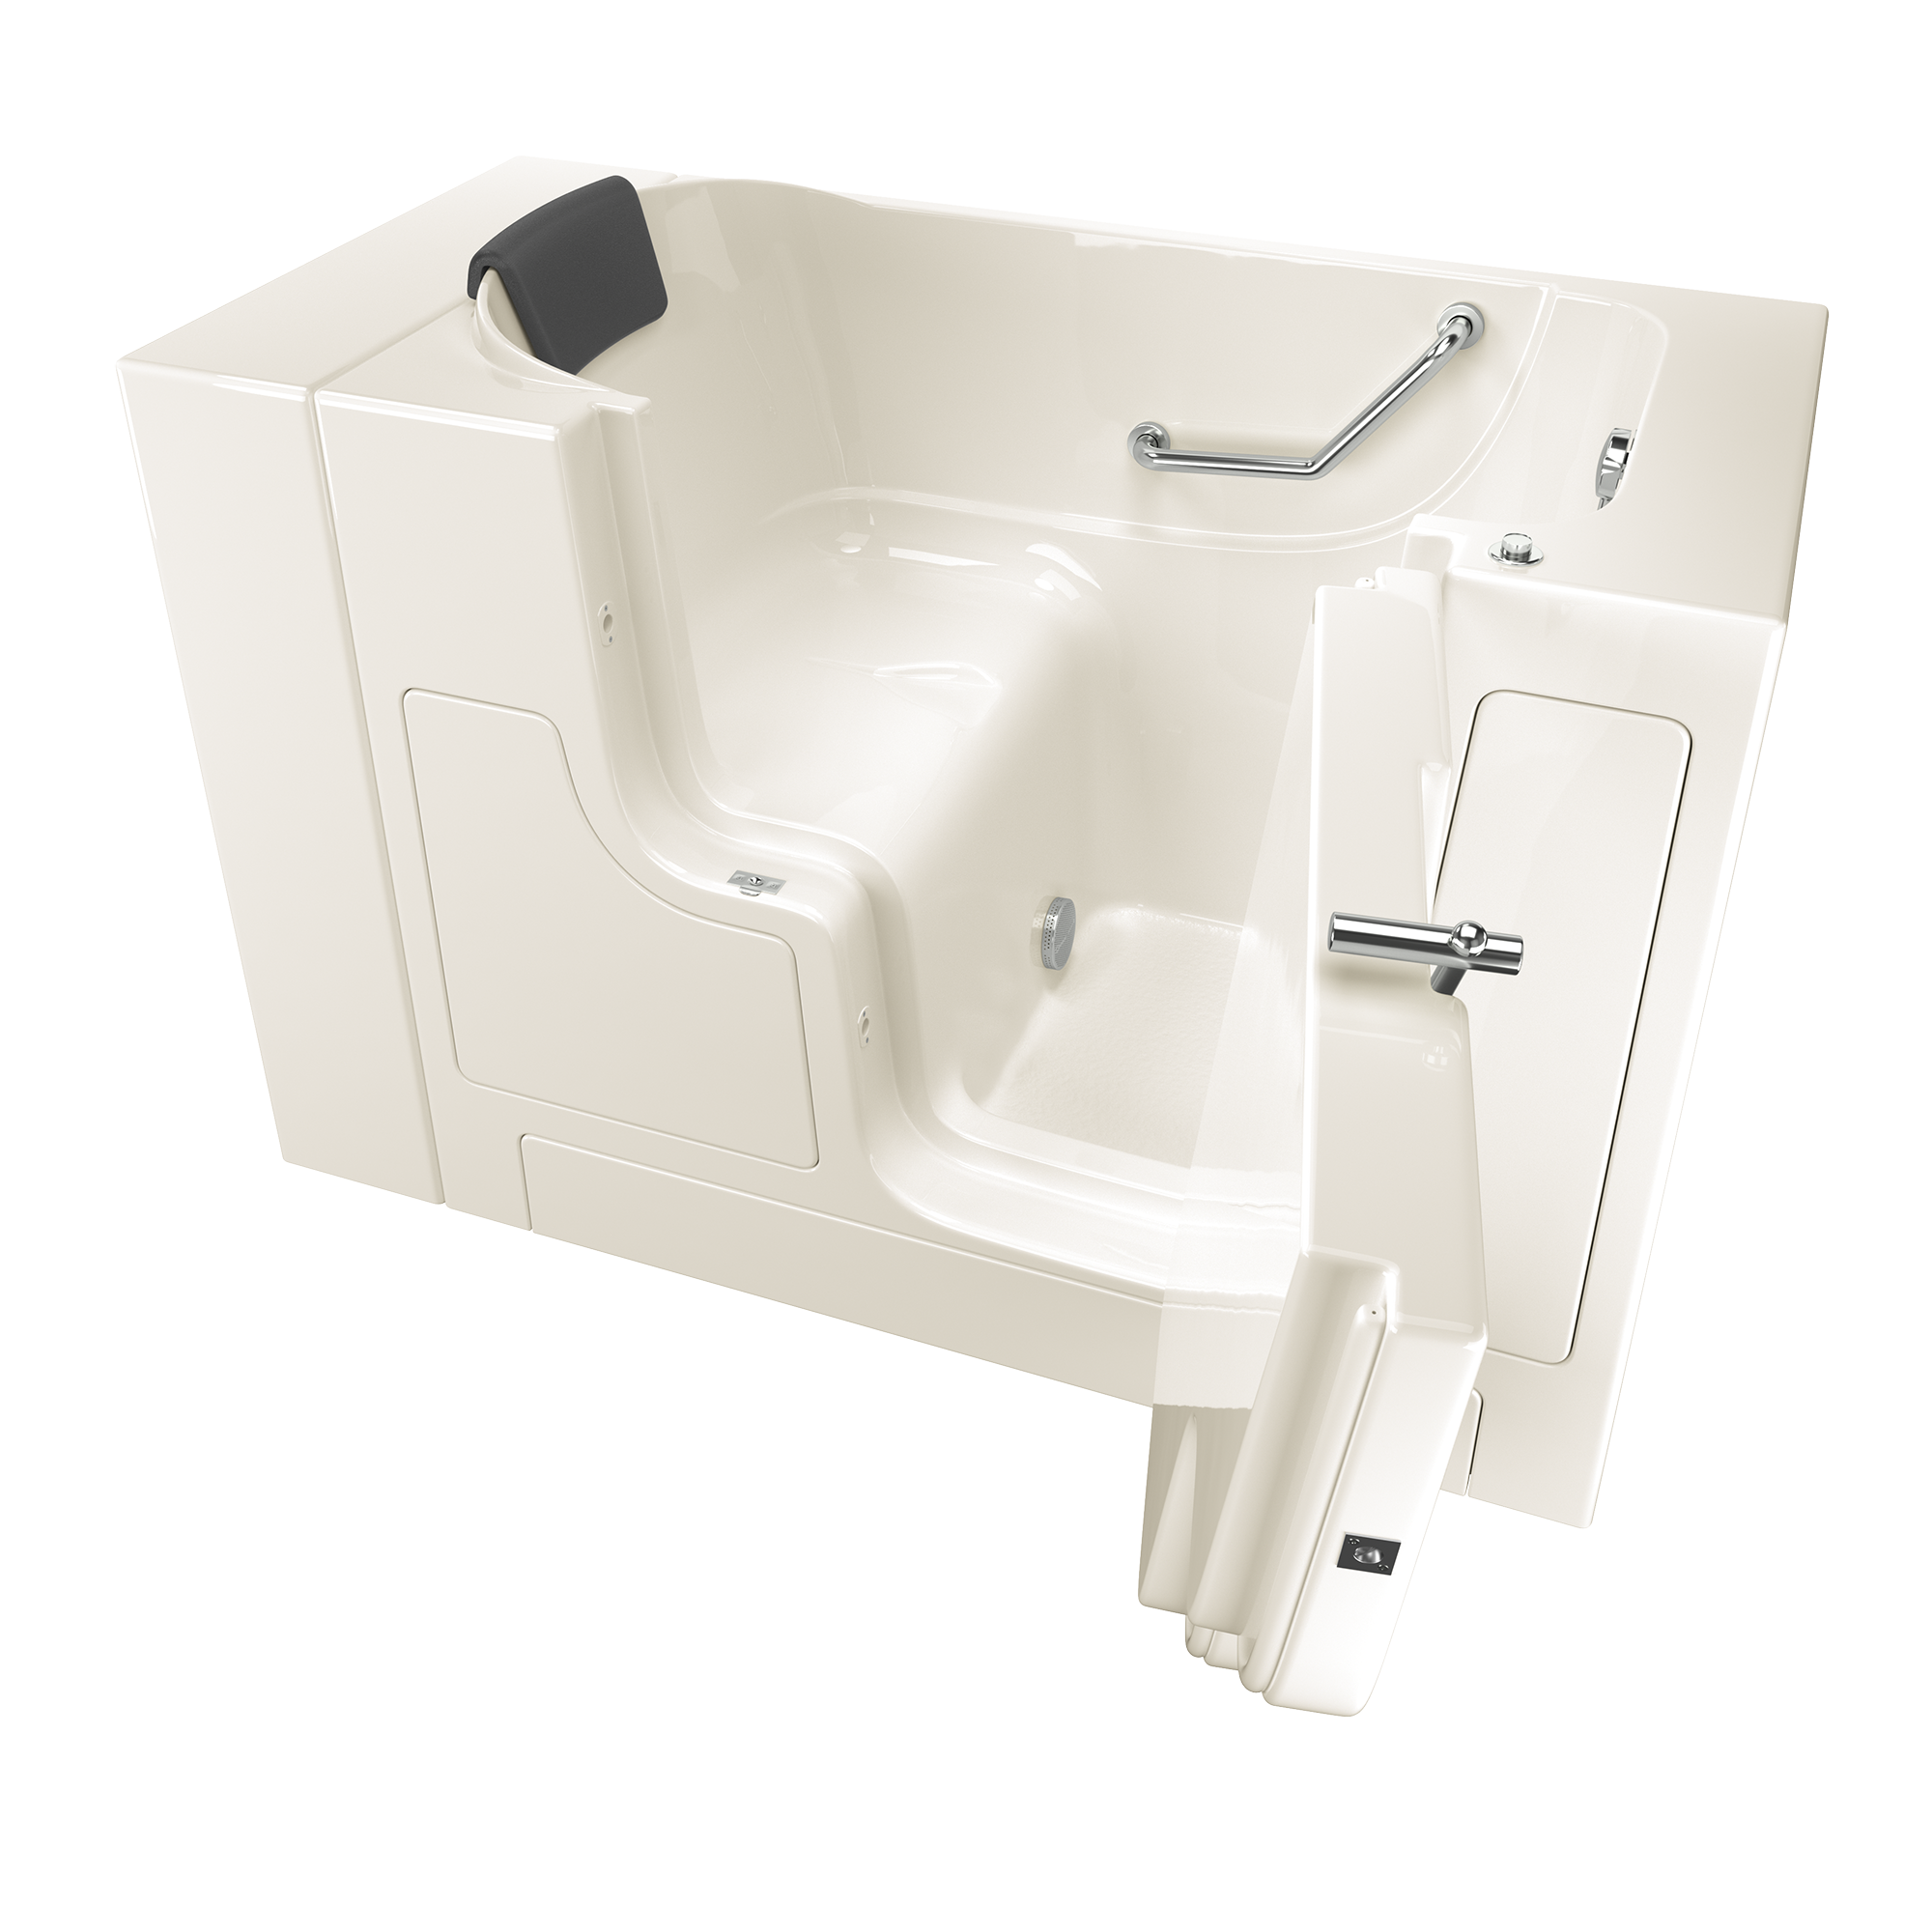 Gelcoat Premium Series 30 x 52 -Inch Walk-in Tub With Soaker System - Right-Hand Drain